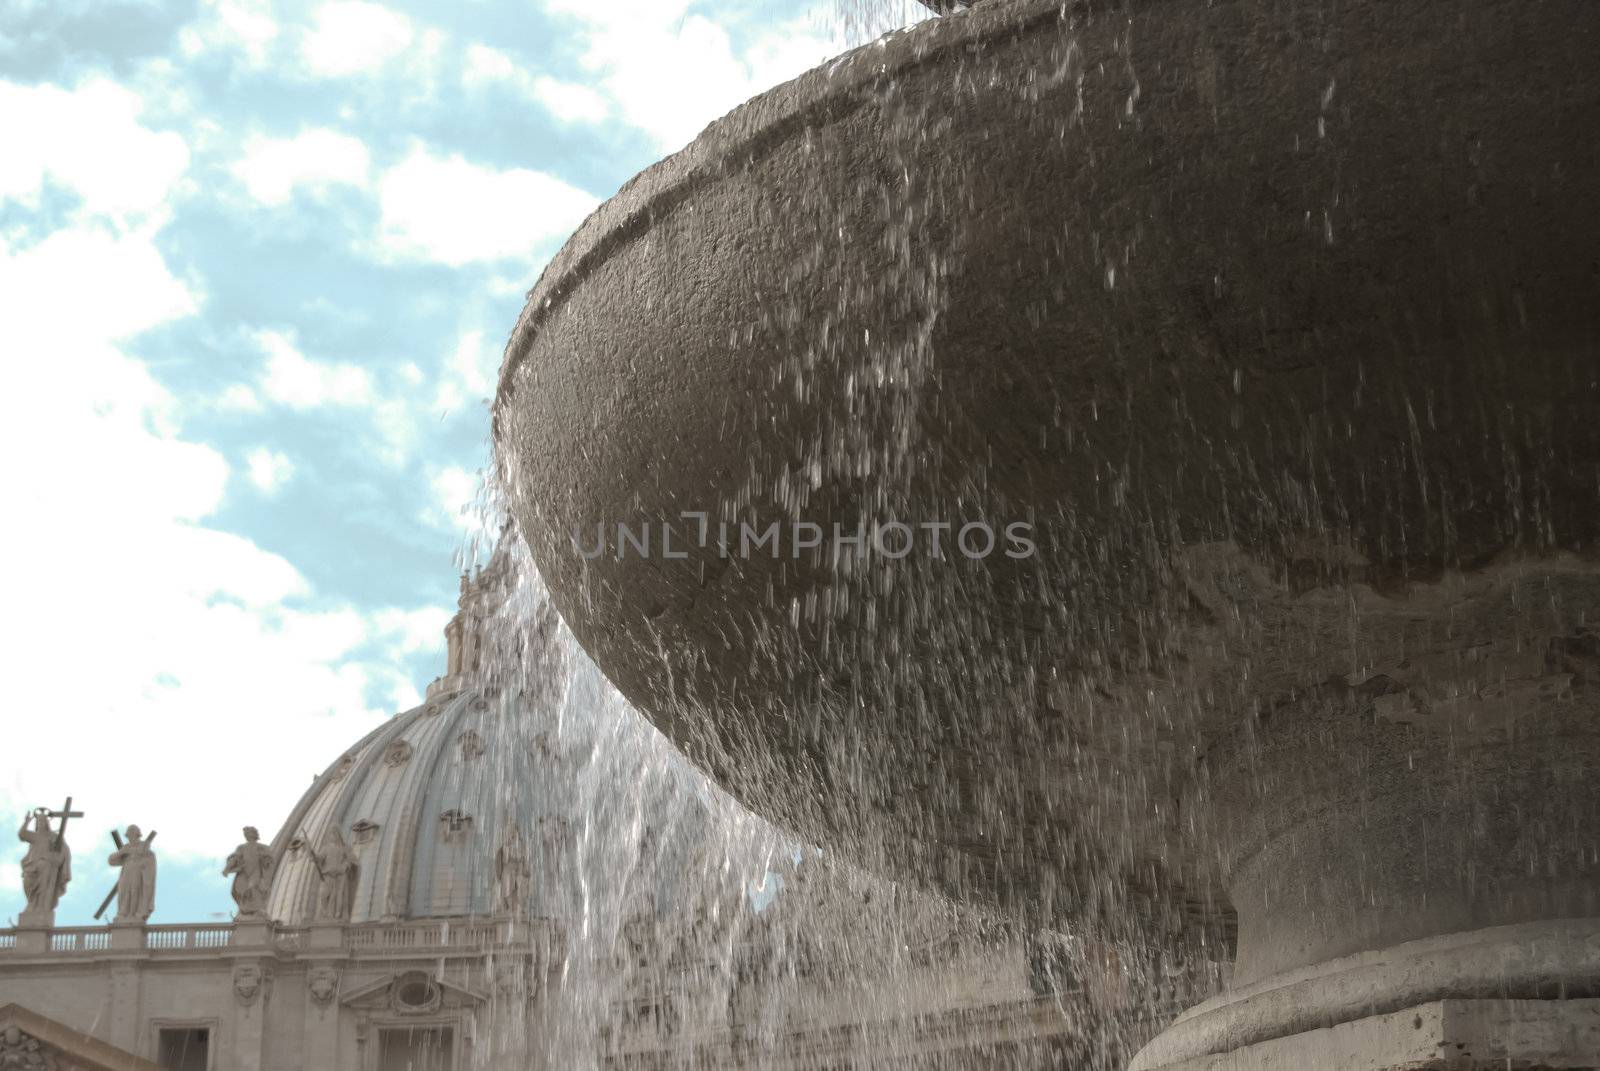 Rome. Particular view of the Basilica of St Peter